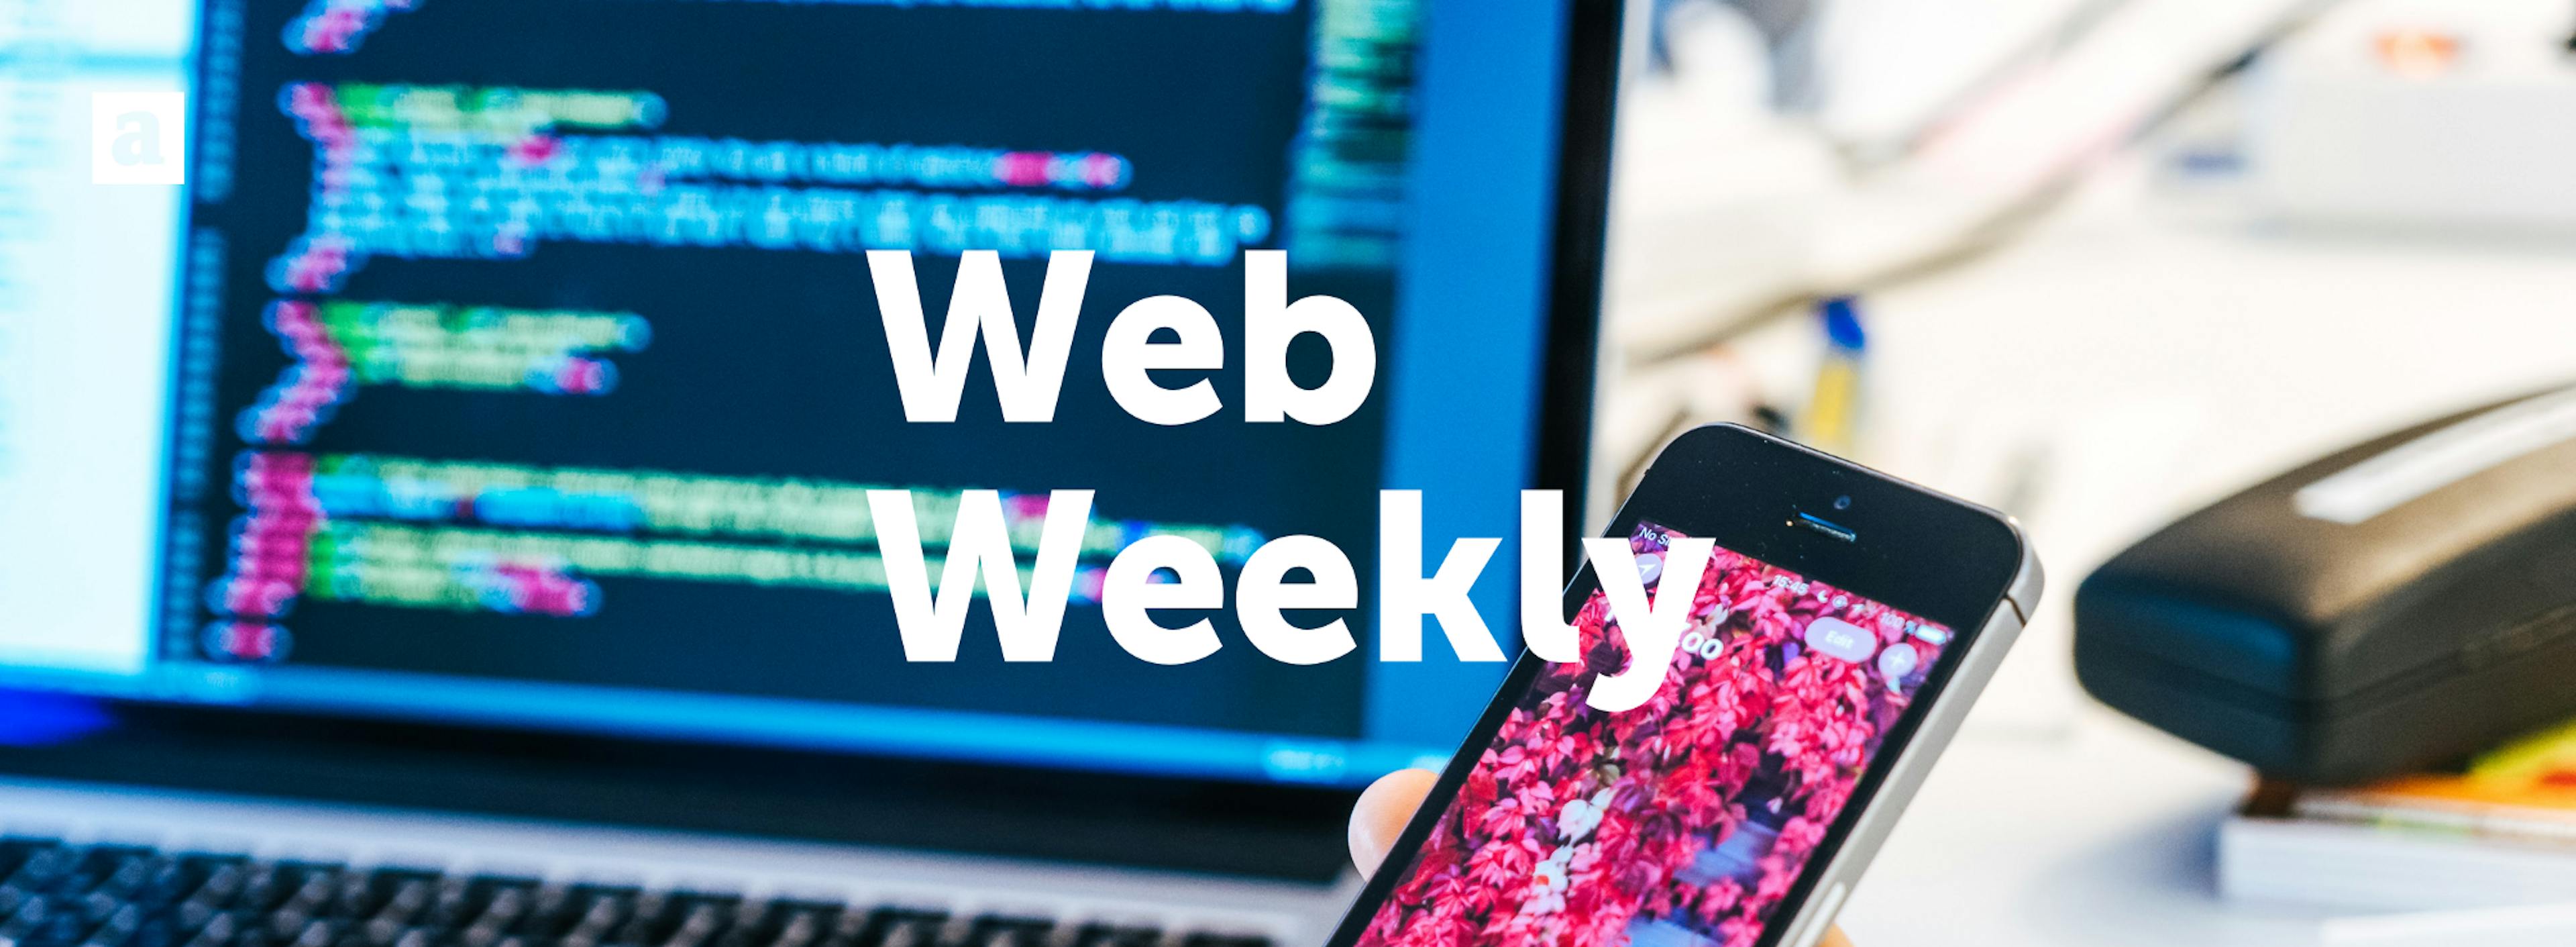 featured image - Web Weekly #18